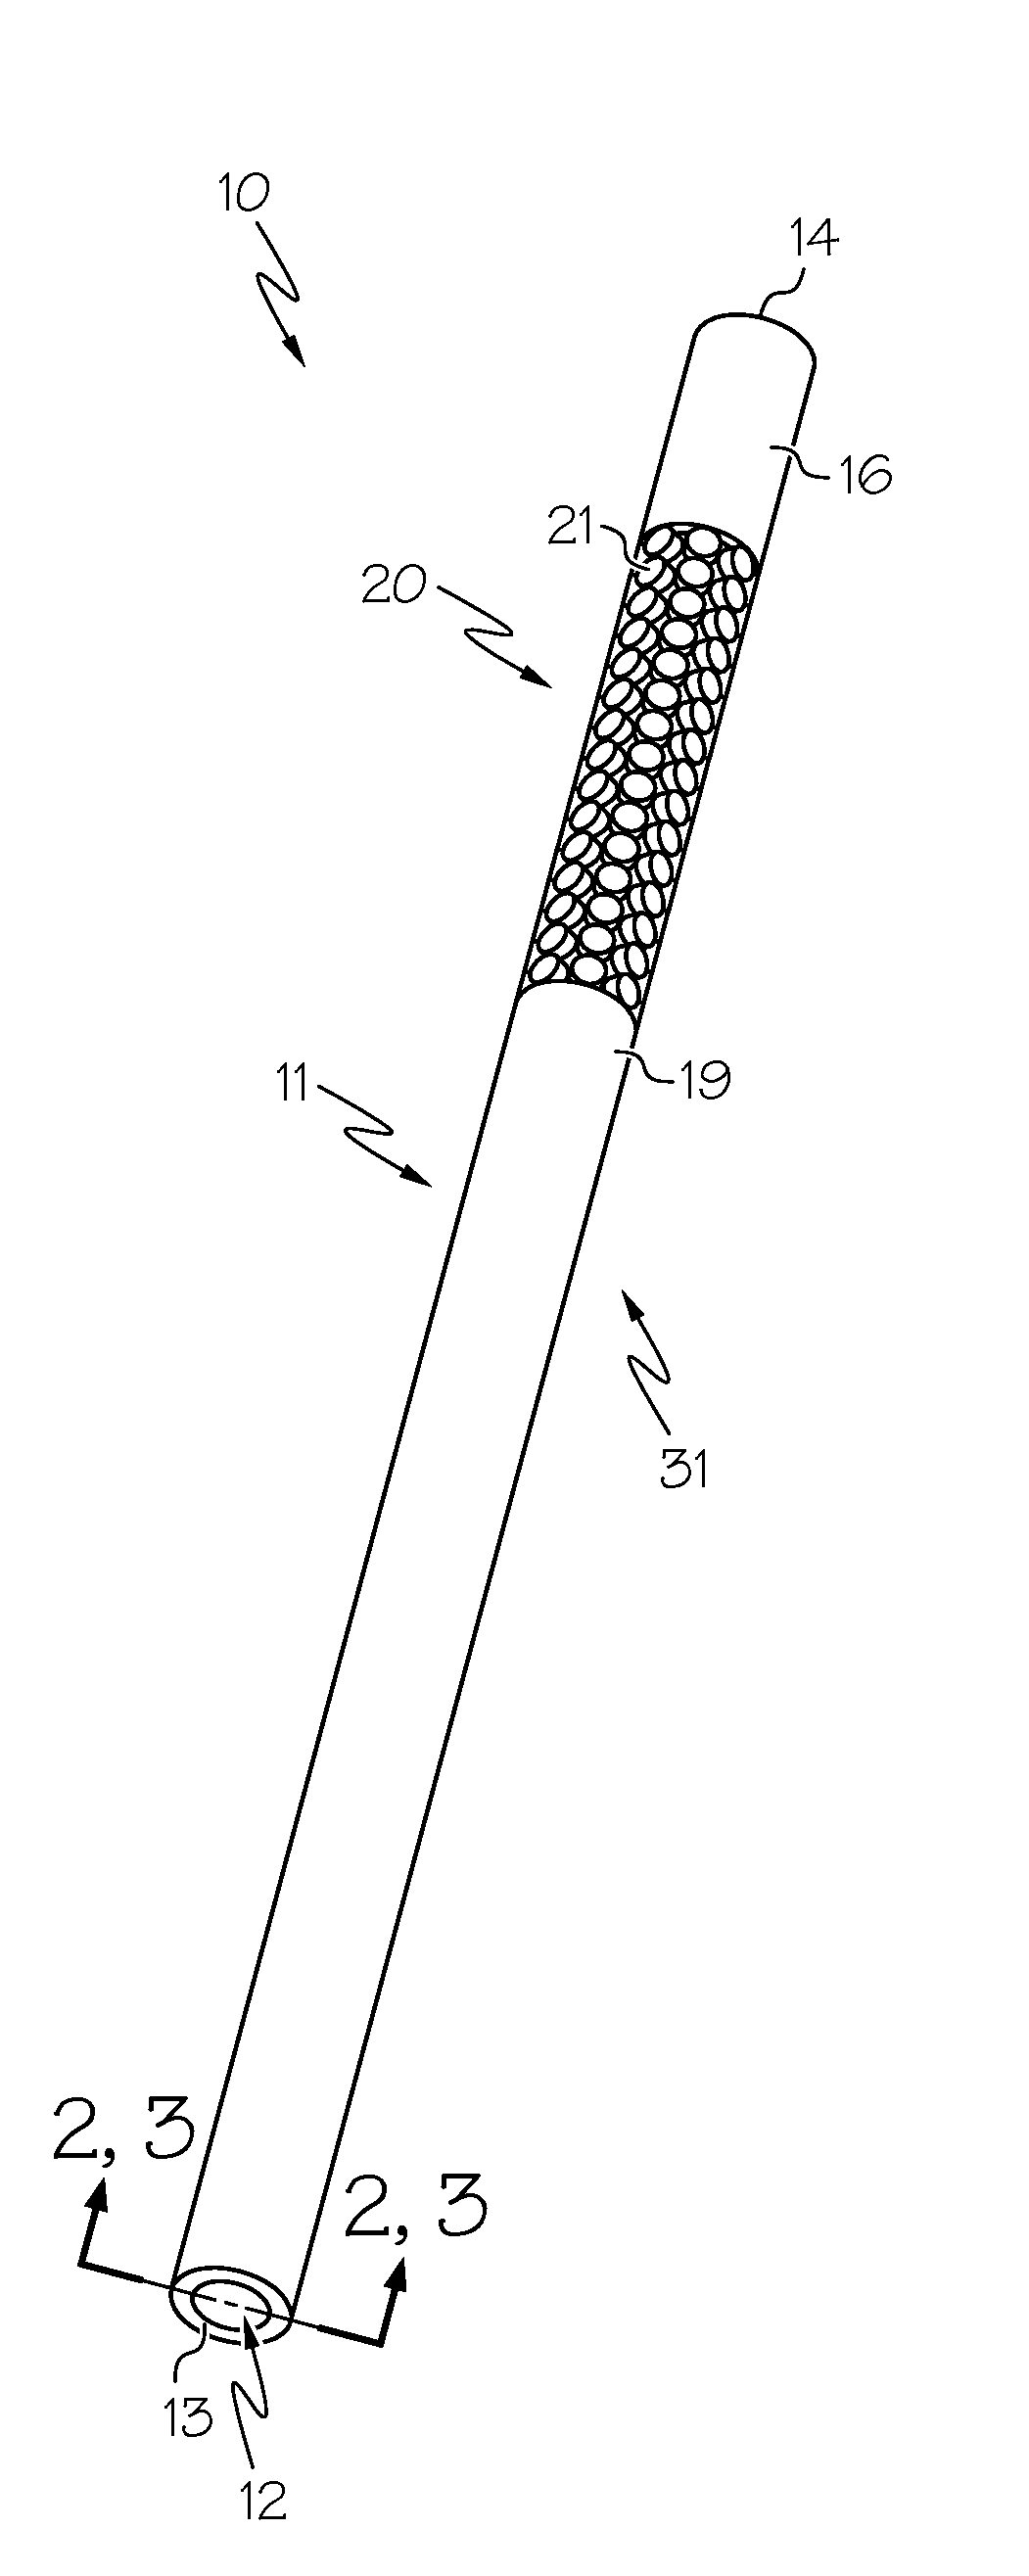 Drinking Straw and Embellishment System